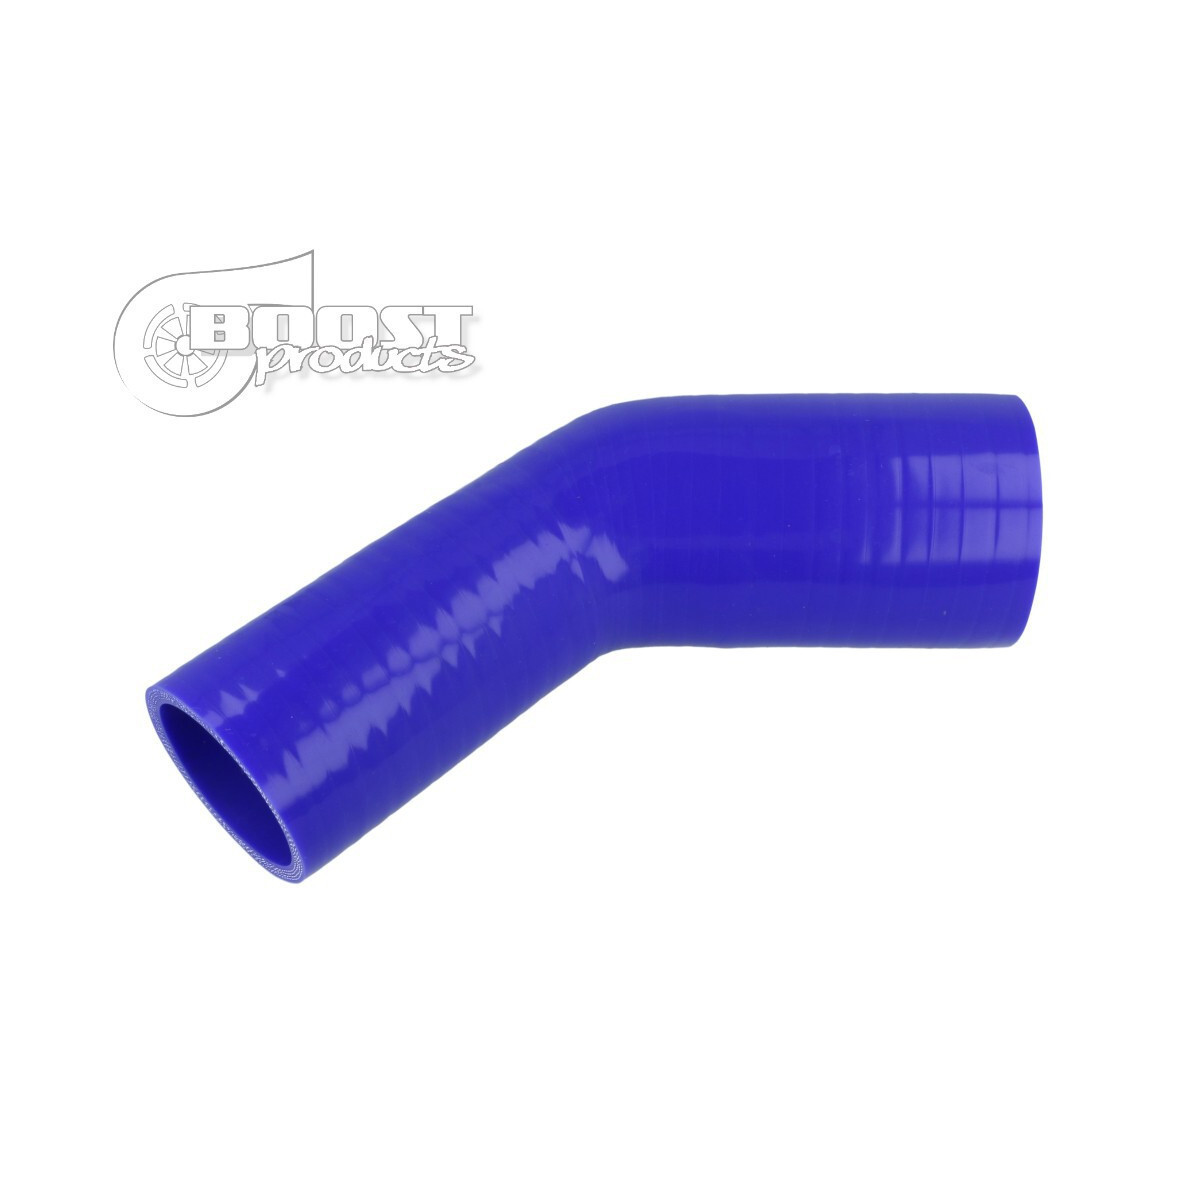 BOOST products Silicone Transition elbow 45°, 38 - 25mm, blue